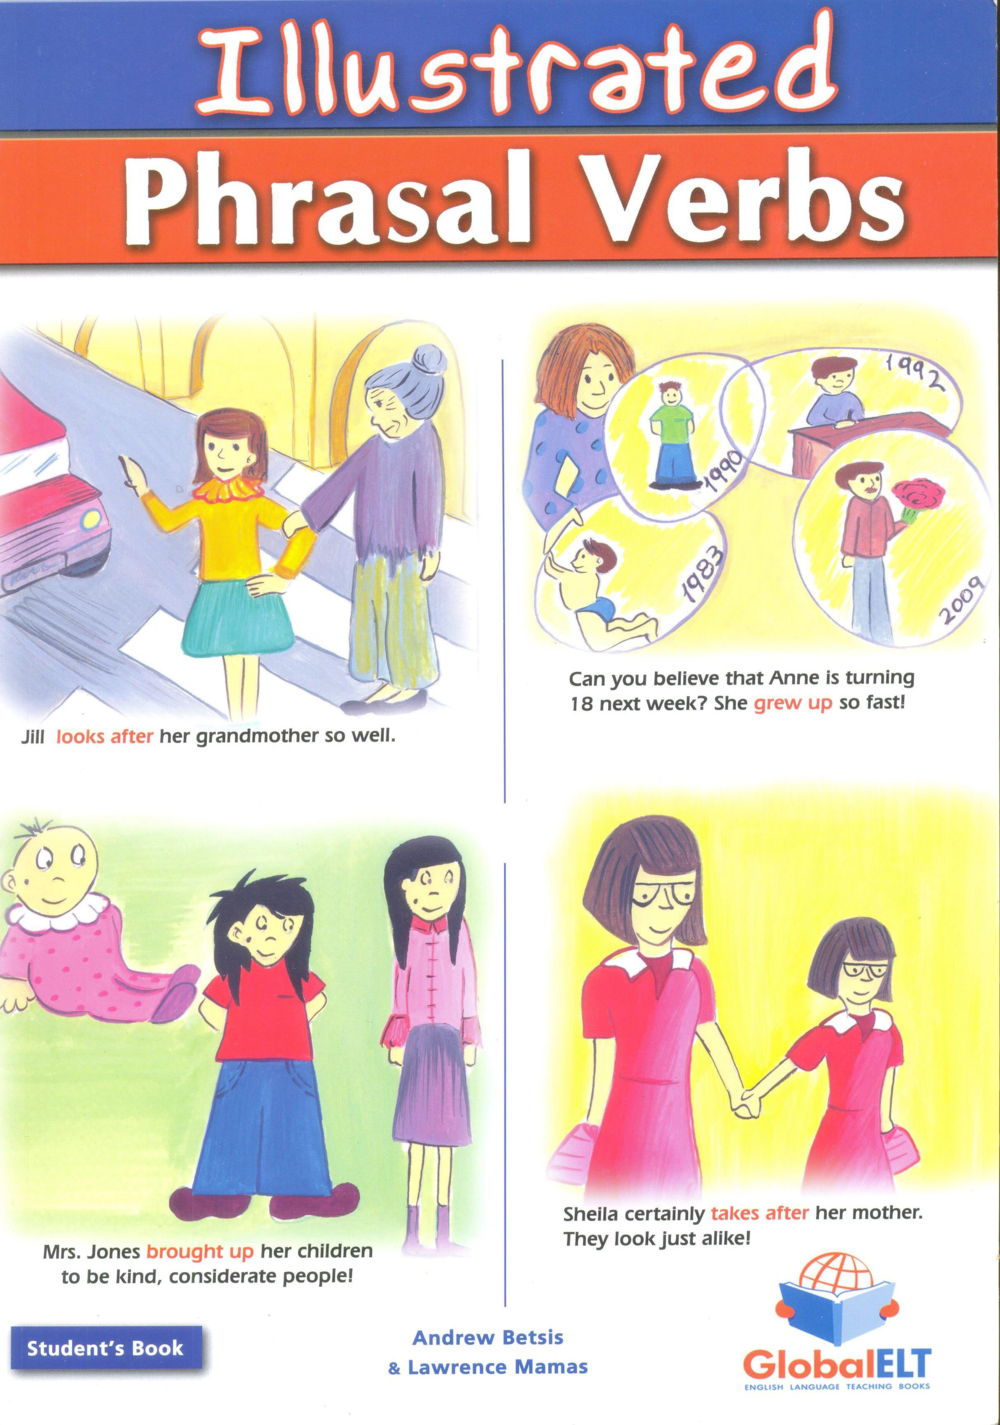 oxford phrasal verbs dictionary pdf free download